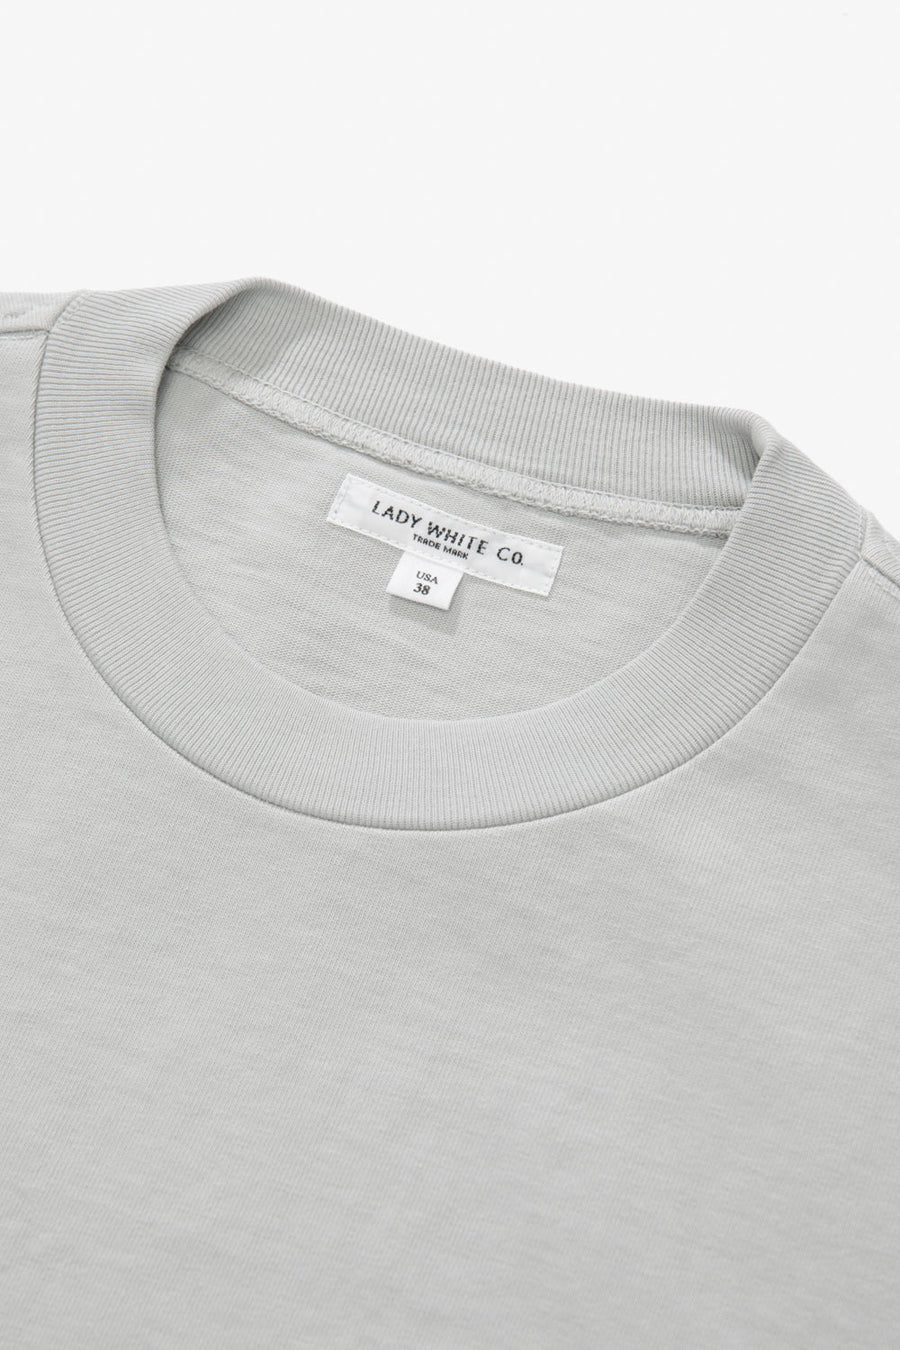 Rugby T-Shirt Stone Grey